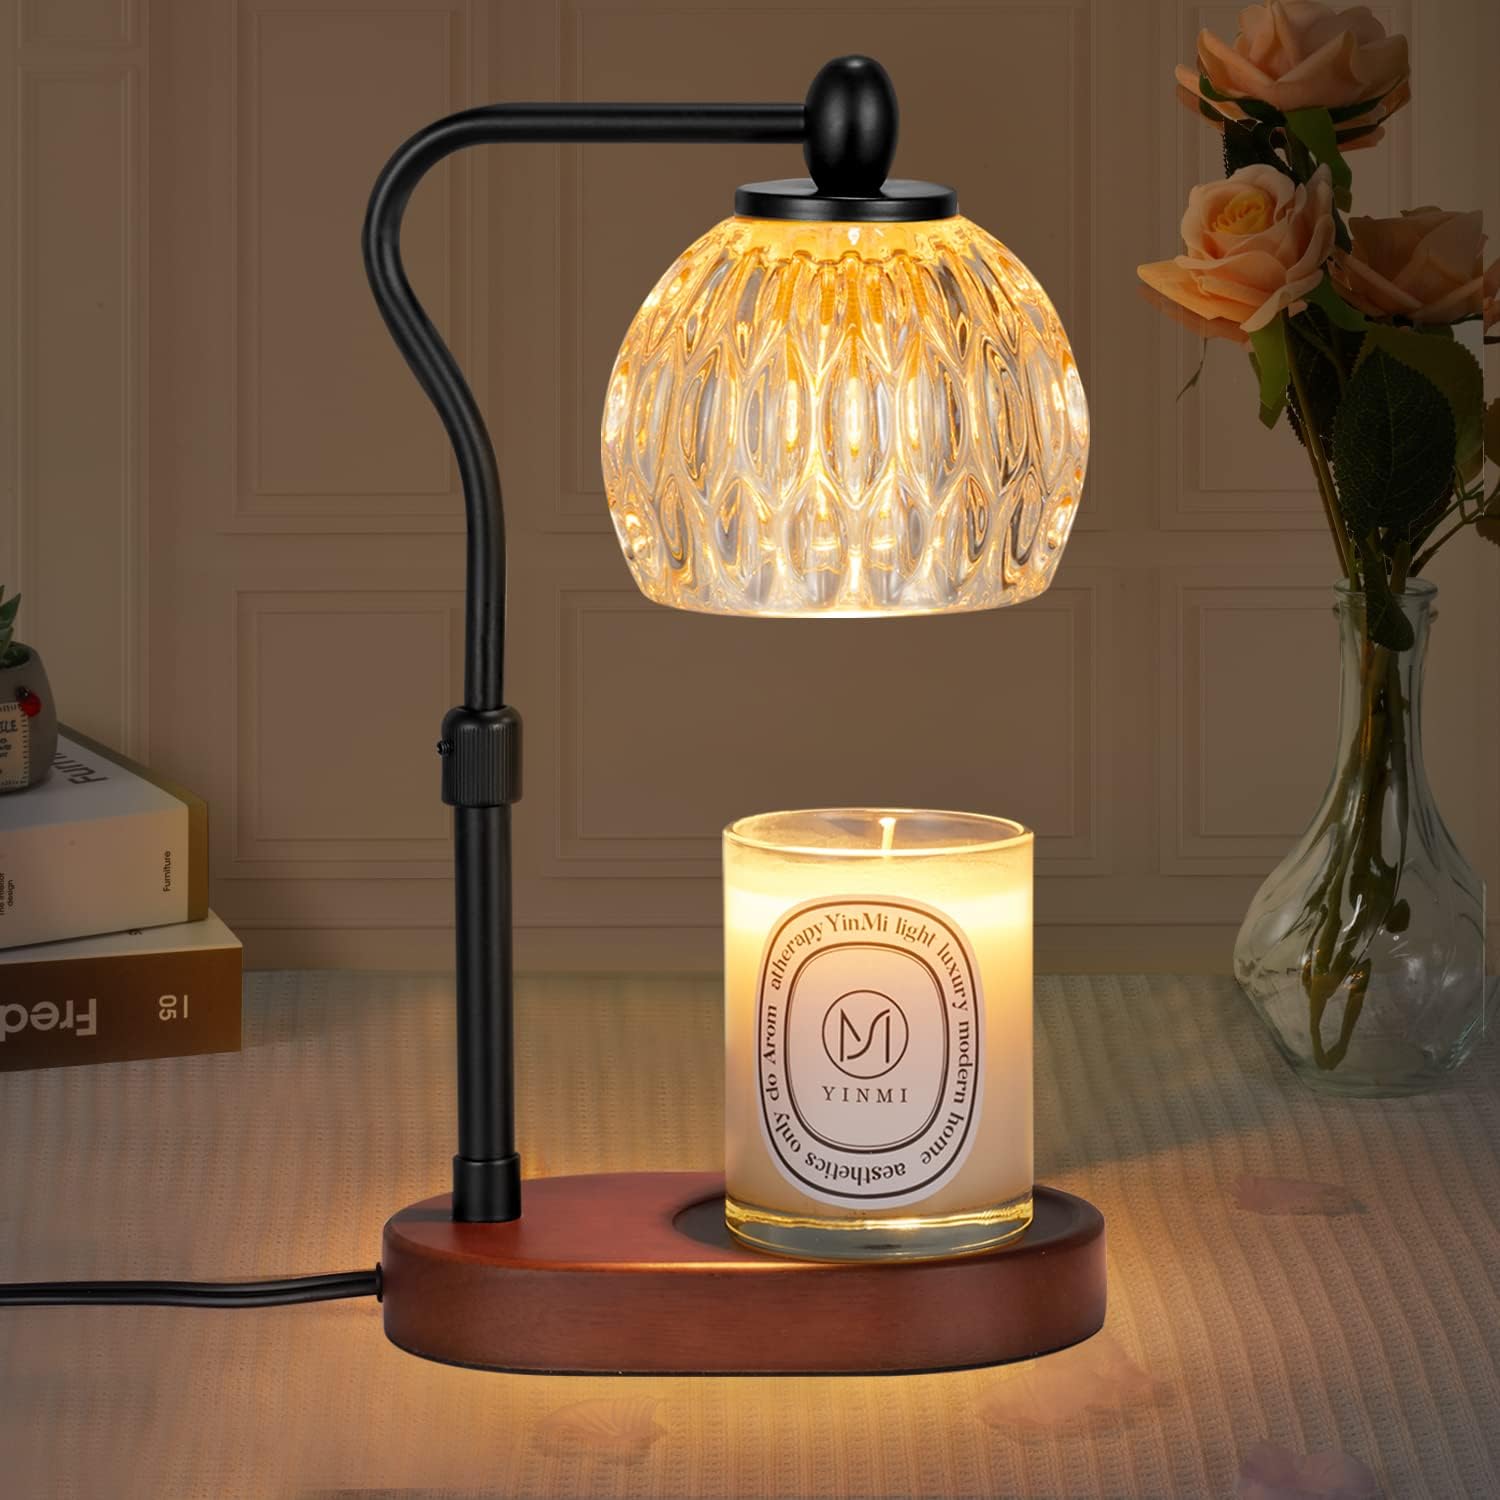 Gifts for Mother's Day —Multi-purpose Adjustable Candle Warmer